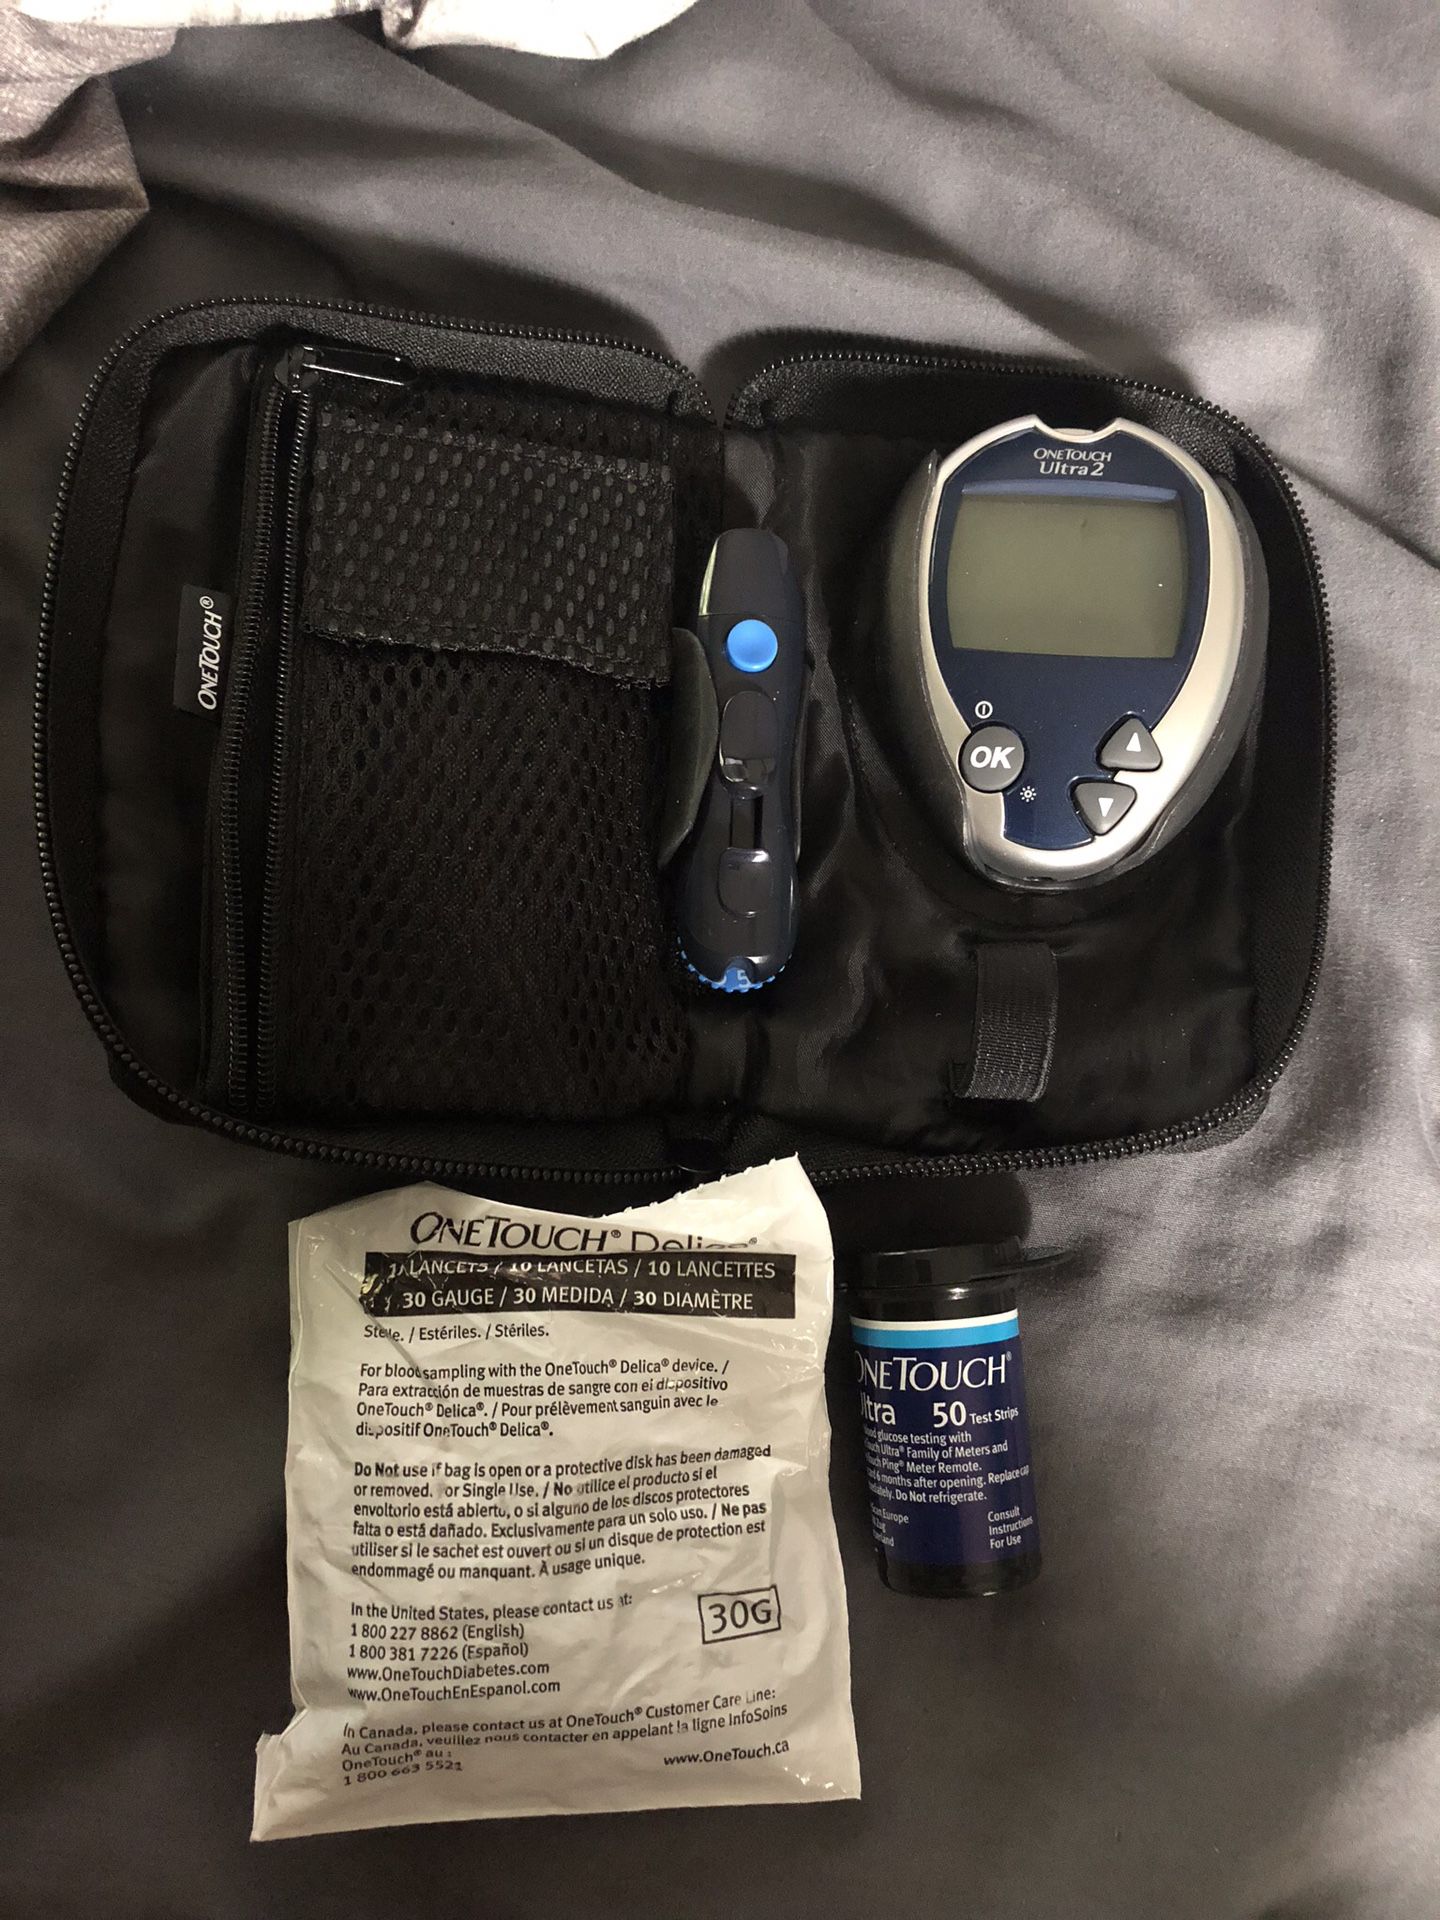 One touch glucose meter